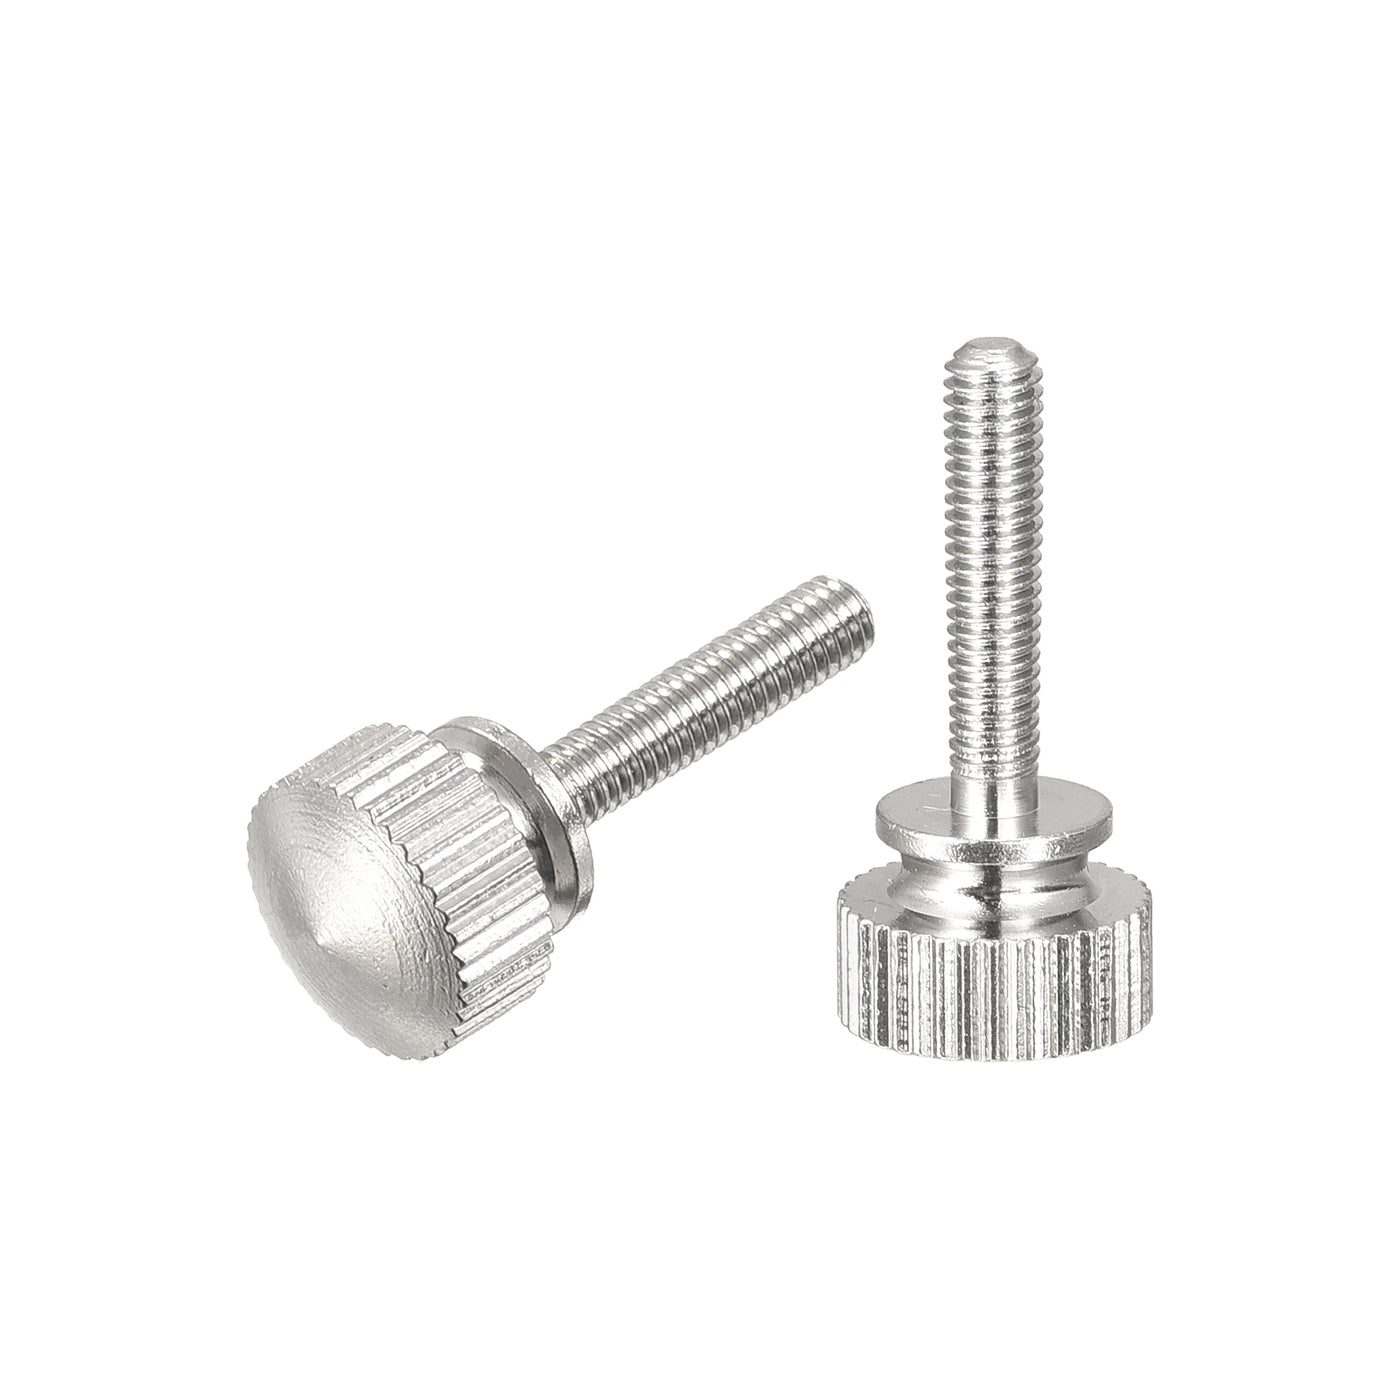 uxcell Uxcell Knurled Thumb Screws, M3x14mm Brass Shoulder Bolts Grip Knobs Fasteners, Nickel Plated 2Pcs